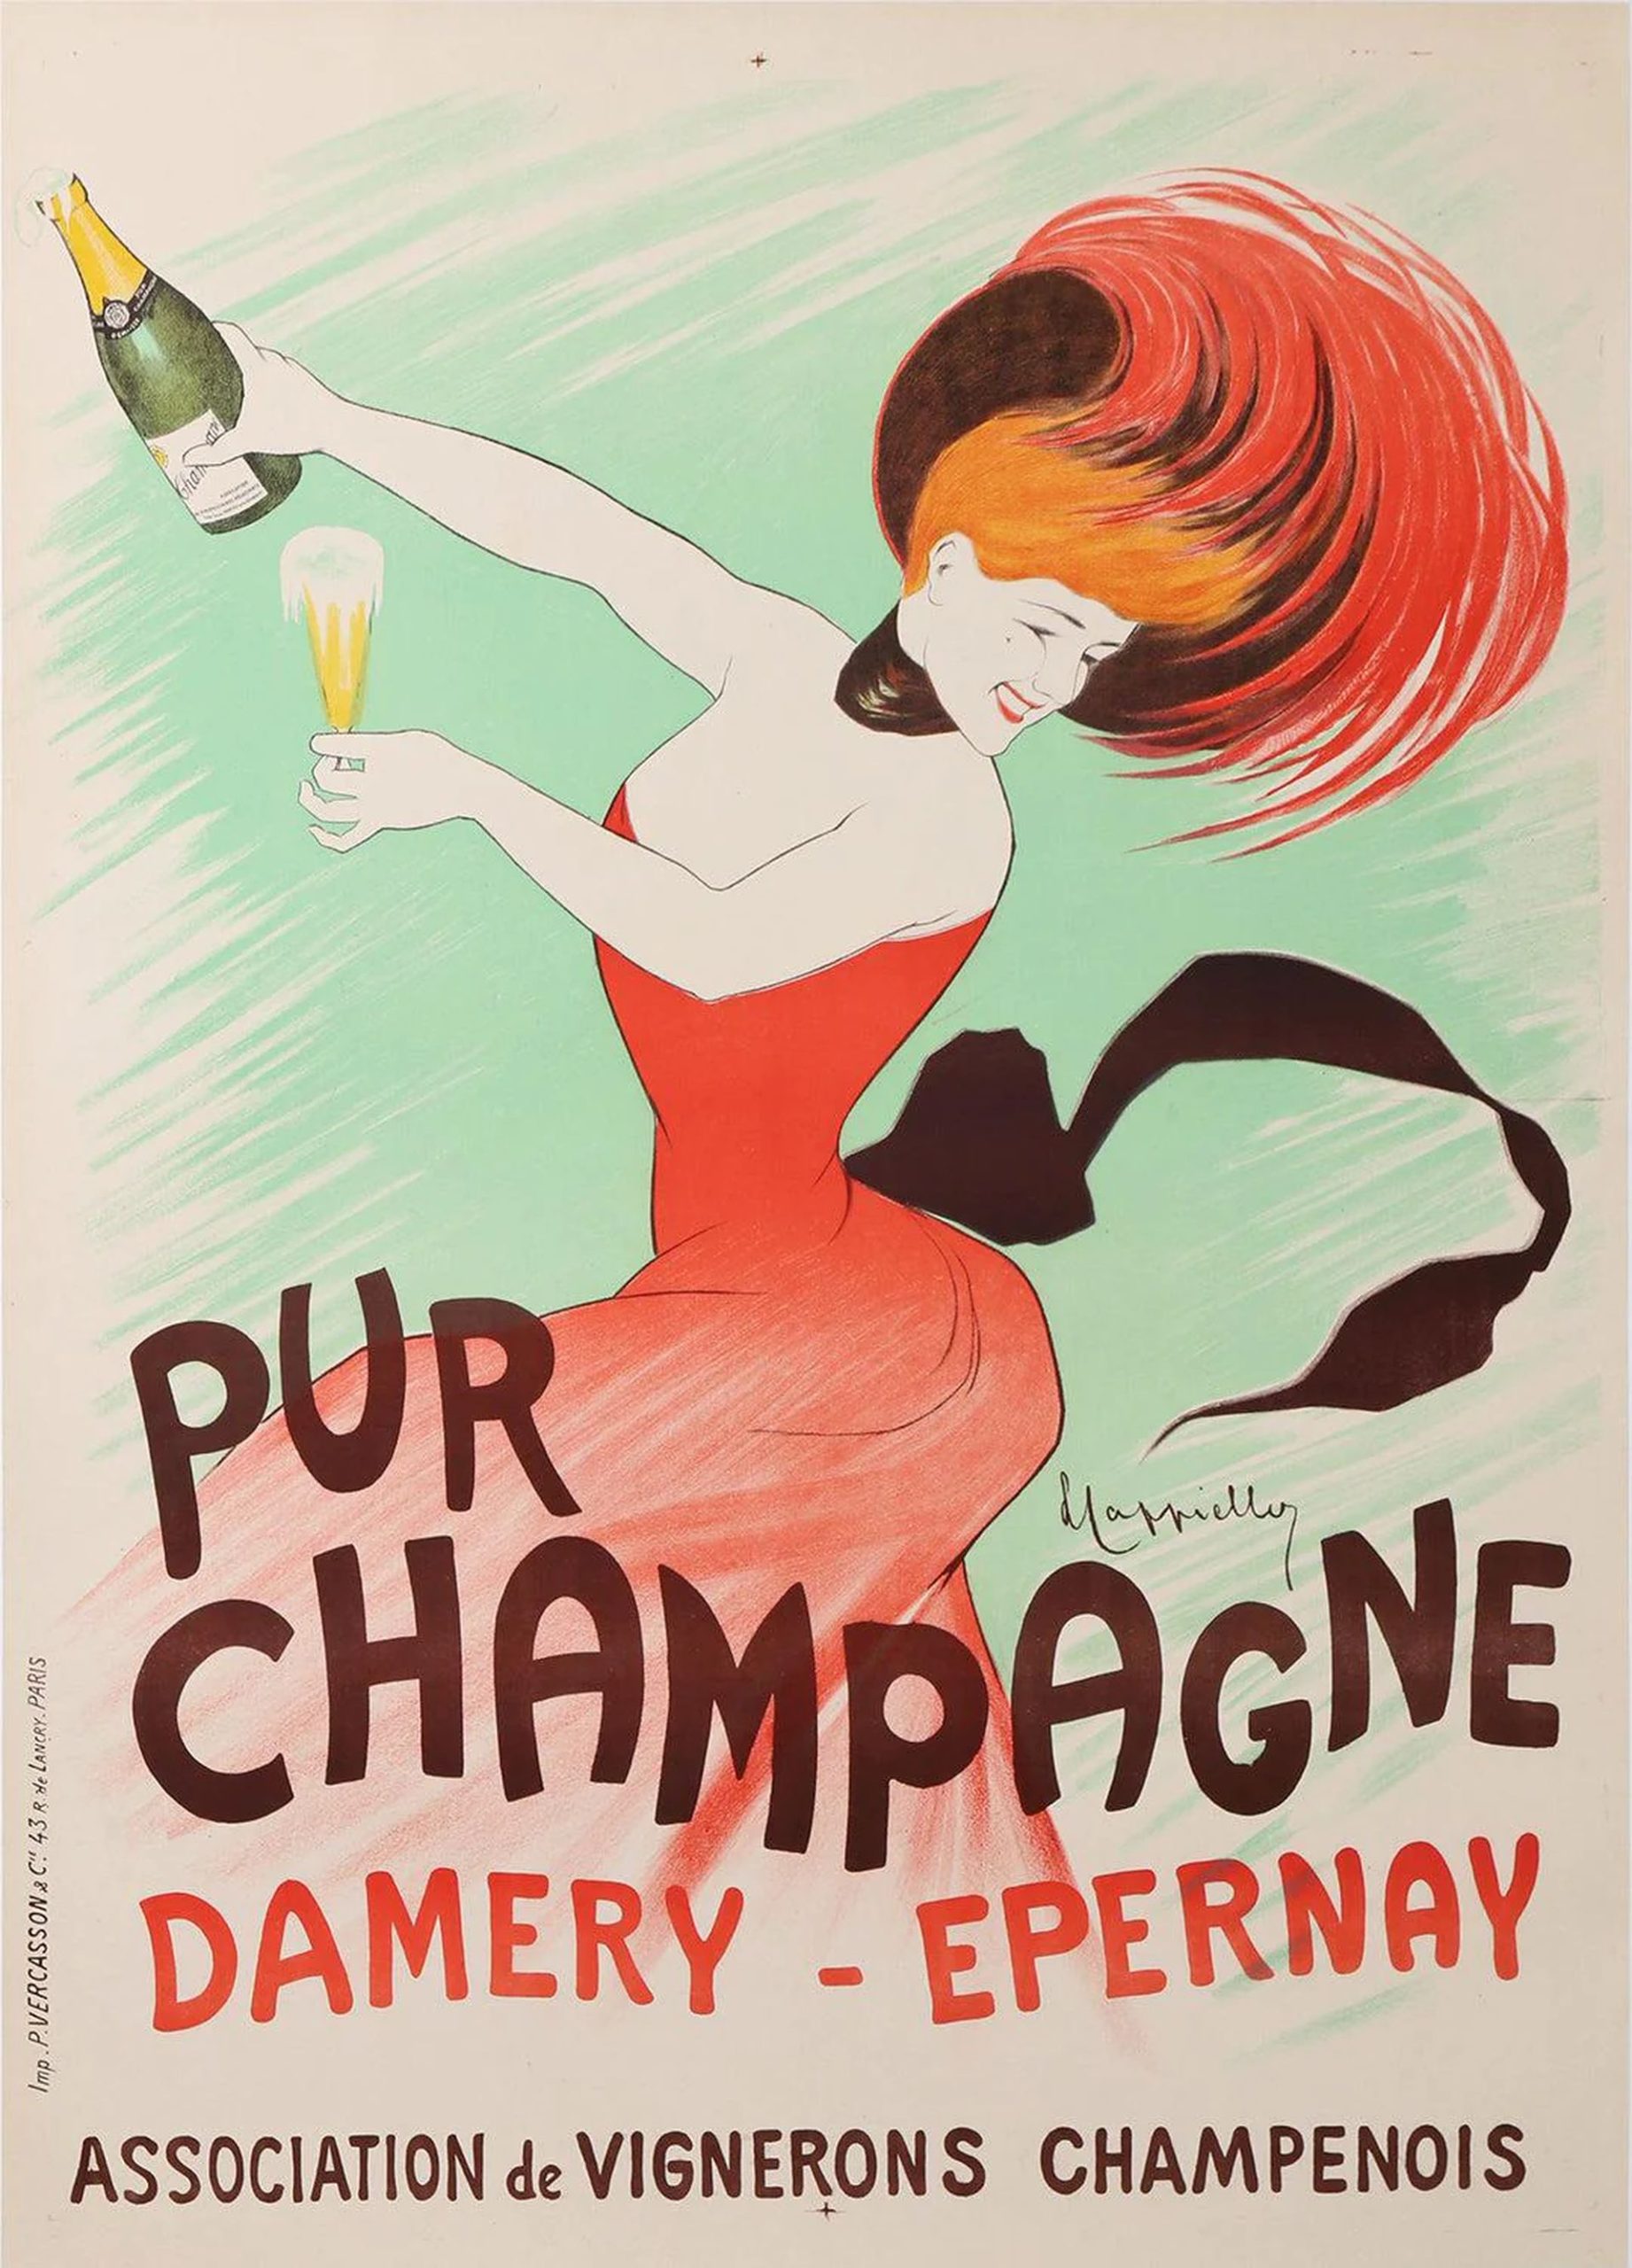 Intricate illustration depicting the sophisticated art of champagne, showcasing the elegance and tradition of champagne production.